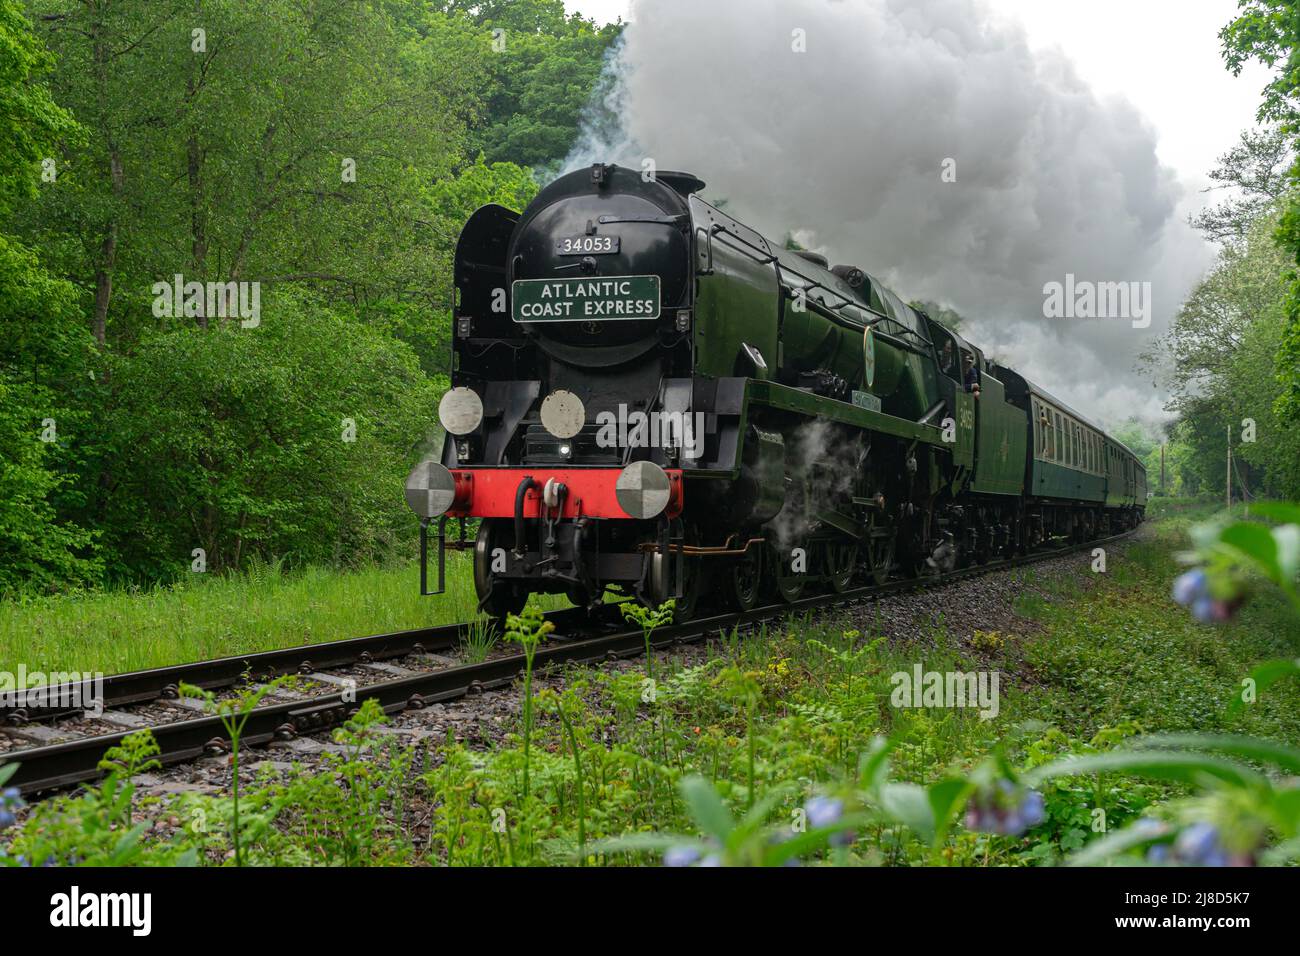 Royal Tunbridge Wells, Kent, UK. 15th May, 2022. Battle of Britain number 34053, 'Sir Keith Park' Pacific Class locomotive makes its final pleasure trips along the historic Spa Valley Railway on a wet sunday afternoon in May before being withdrawn for boiler overhaul. Credit: Sarah Mott/Alamy Live News Stock Photo